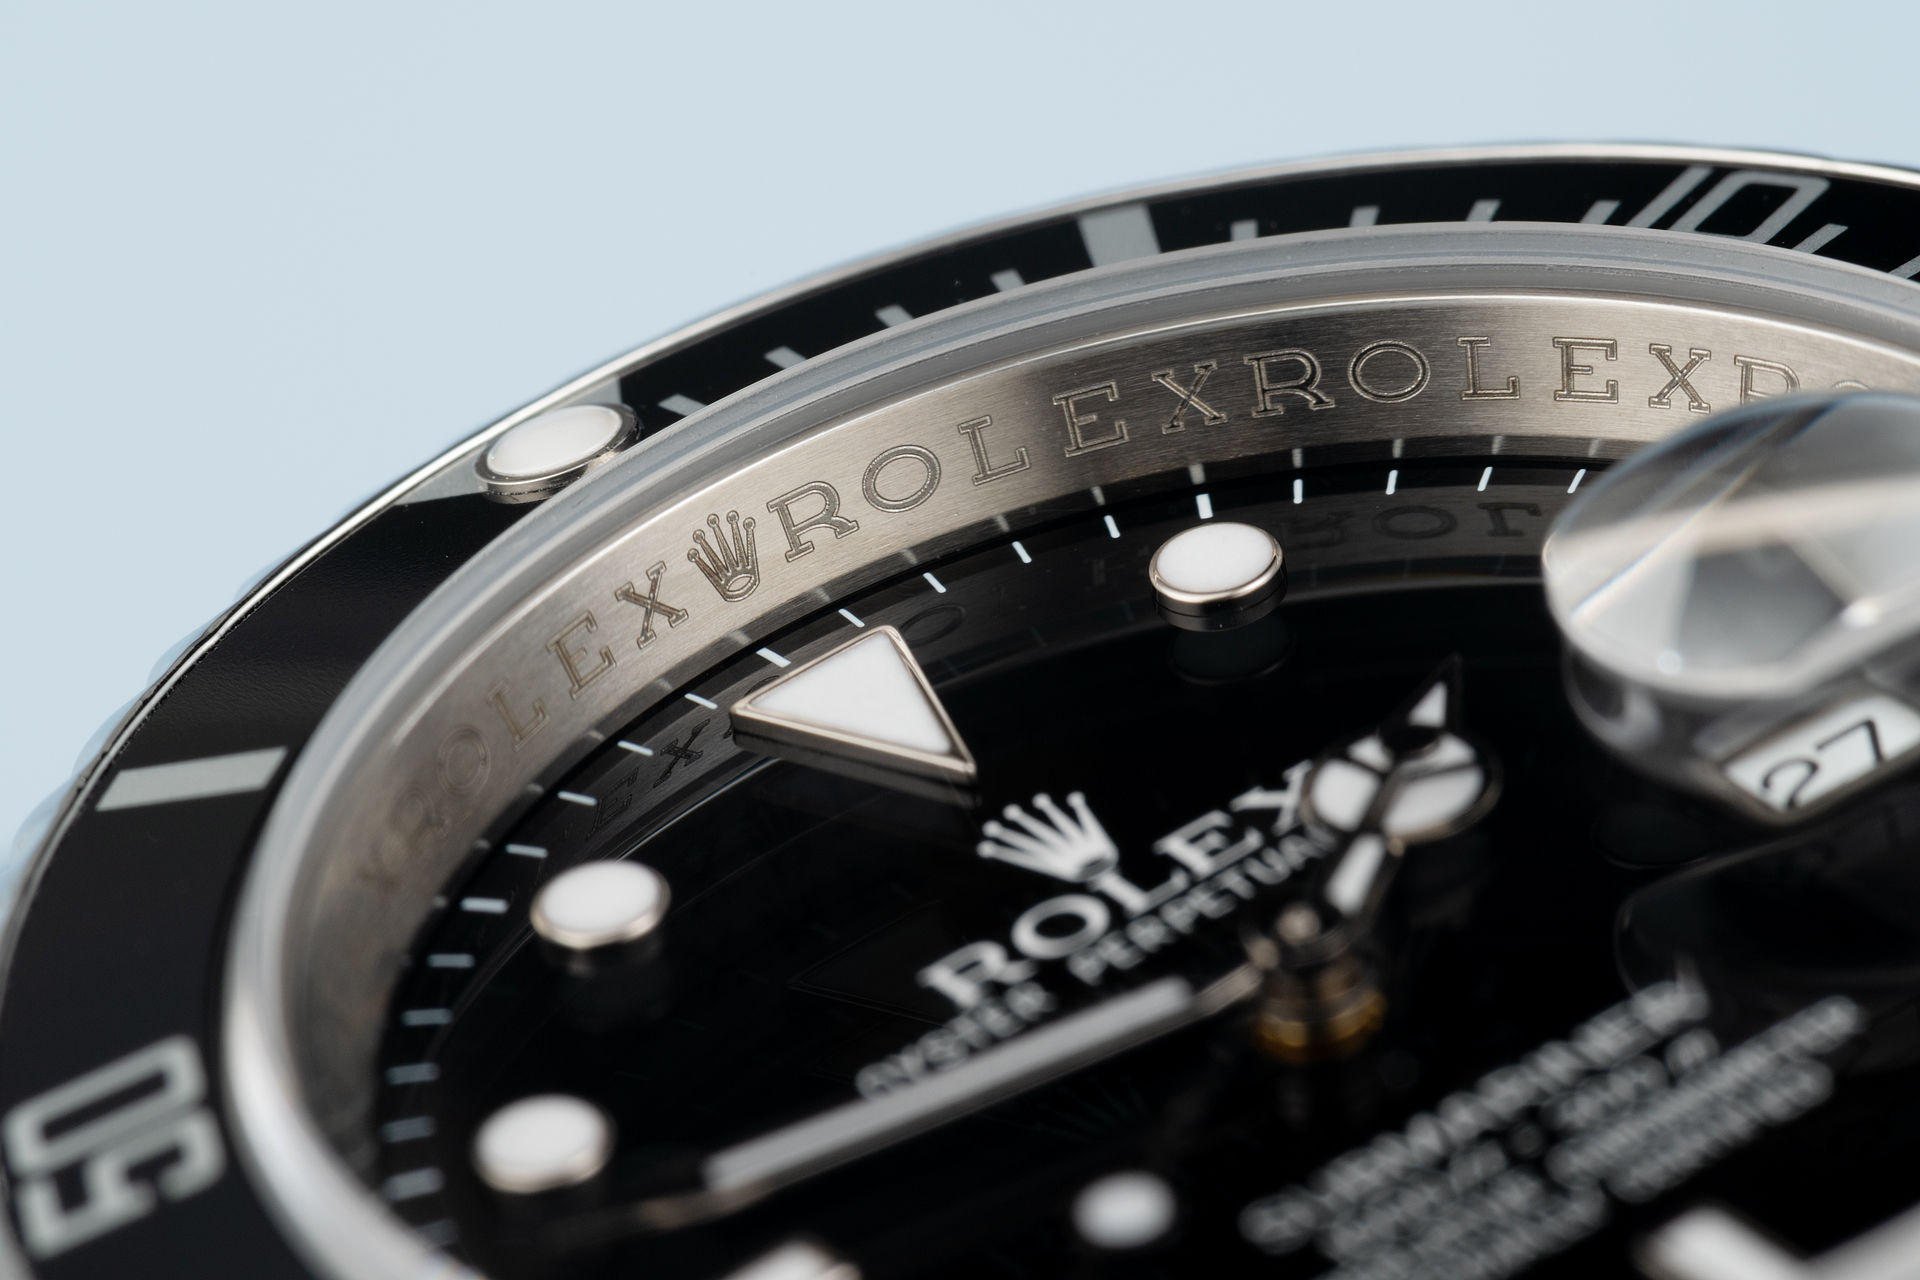 ref 16610 | Extremely Rare 'Final Batch' | Rolex Submariner Date